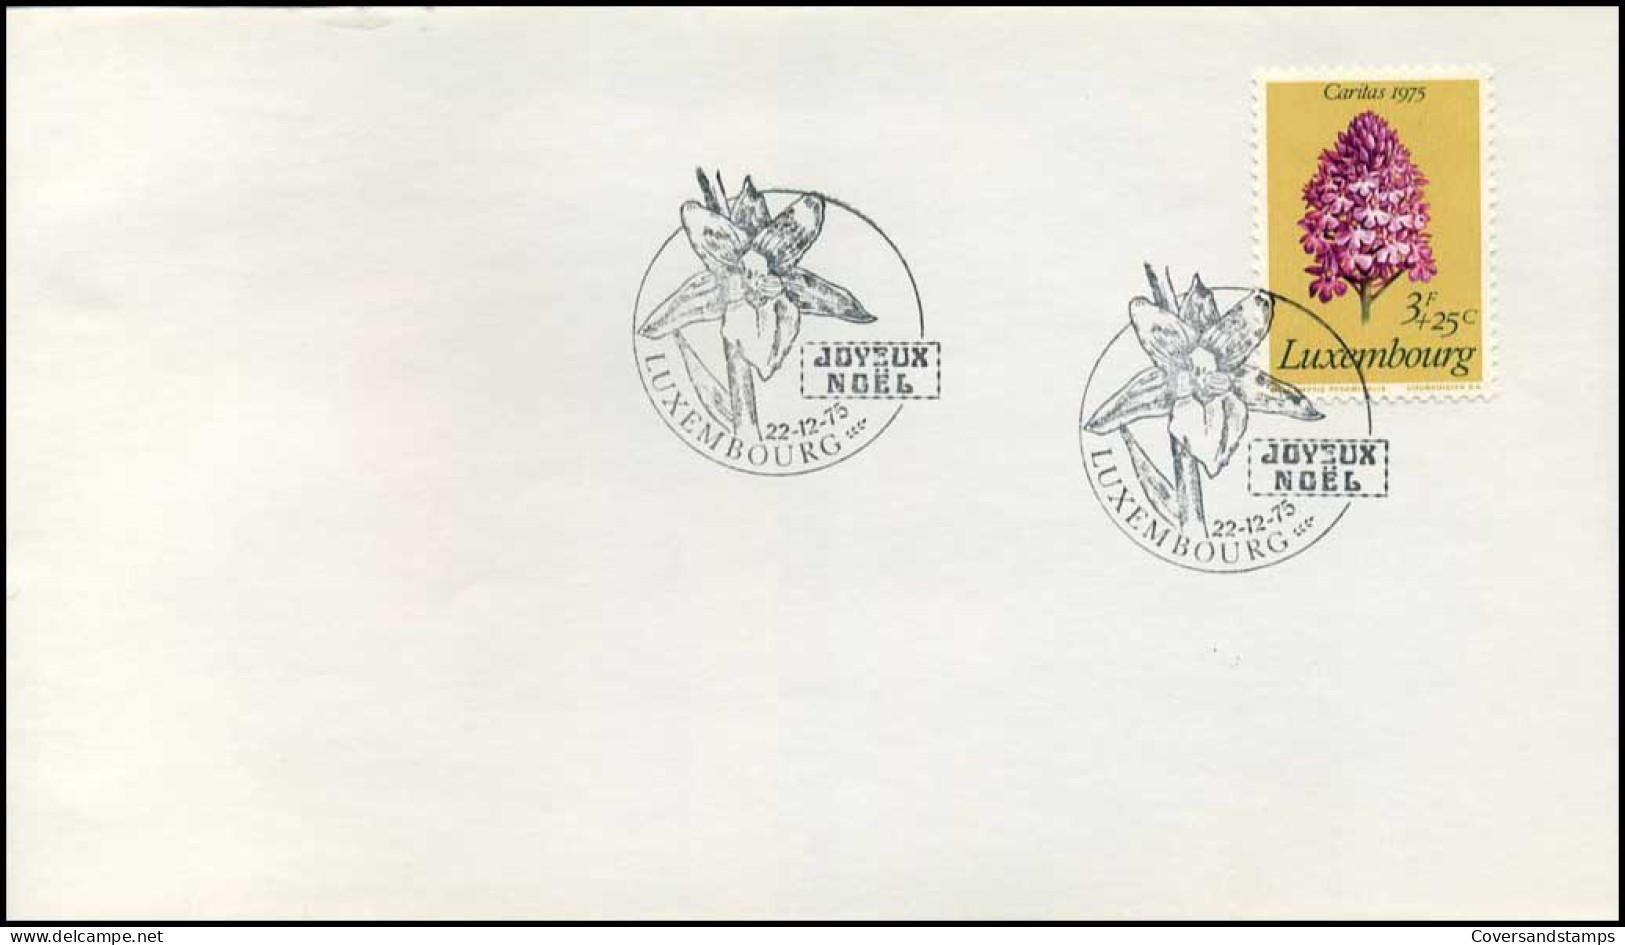 Luxembourg - FDC - Caritas 1975 - FDC